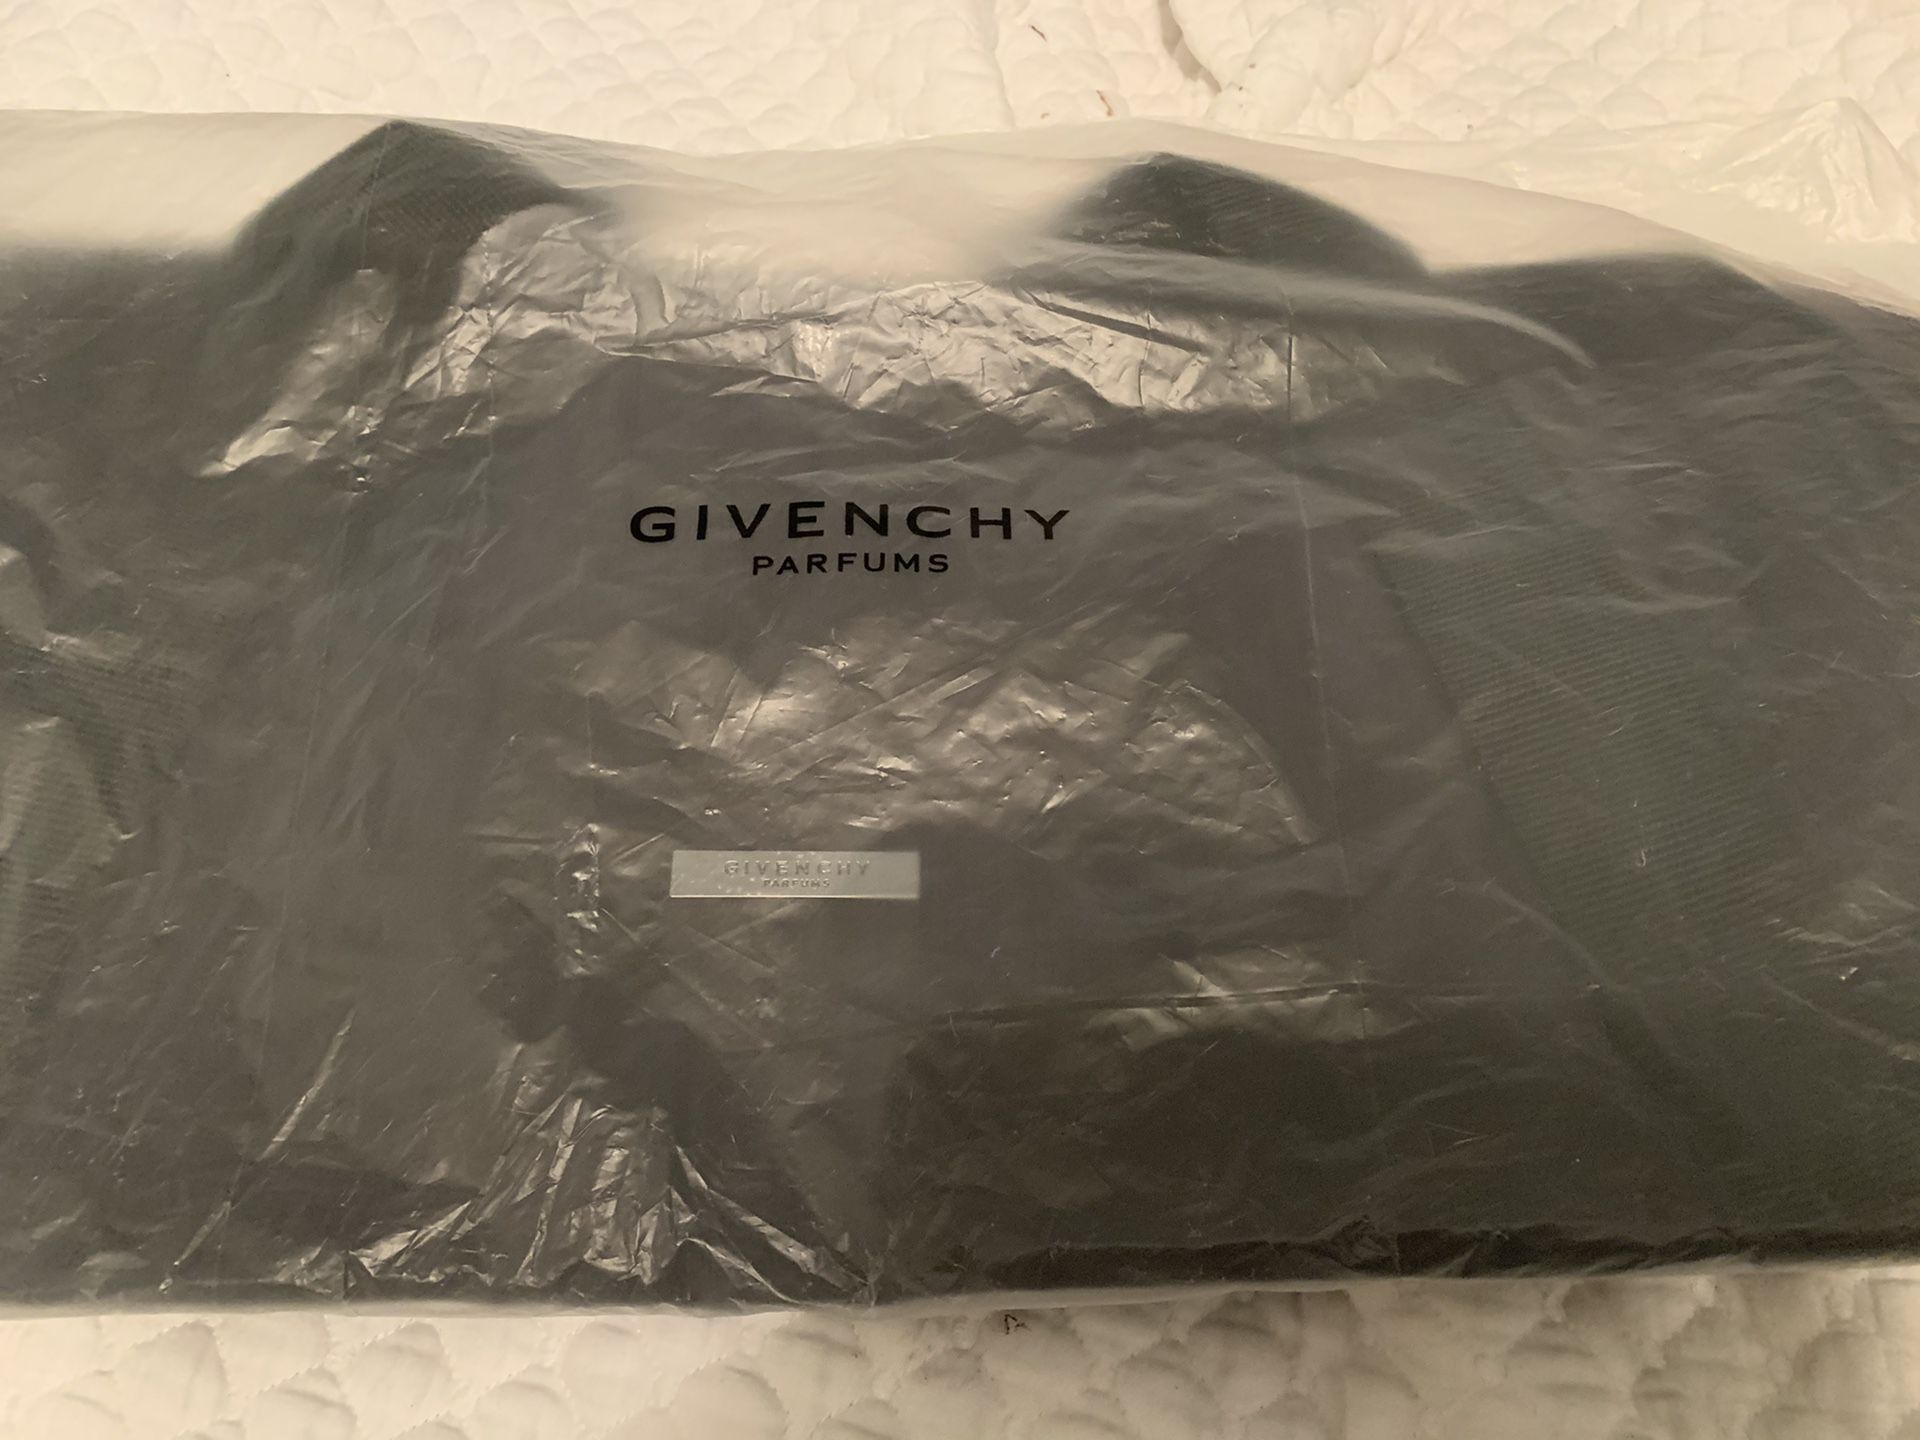 The perfect gift for Father’s Day. Black Givenchy tote bag